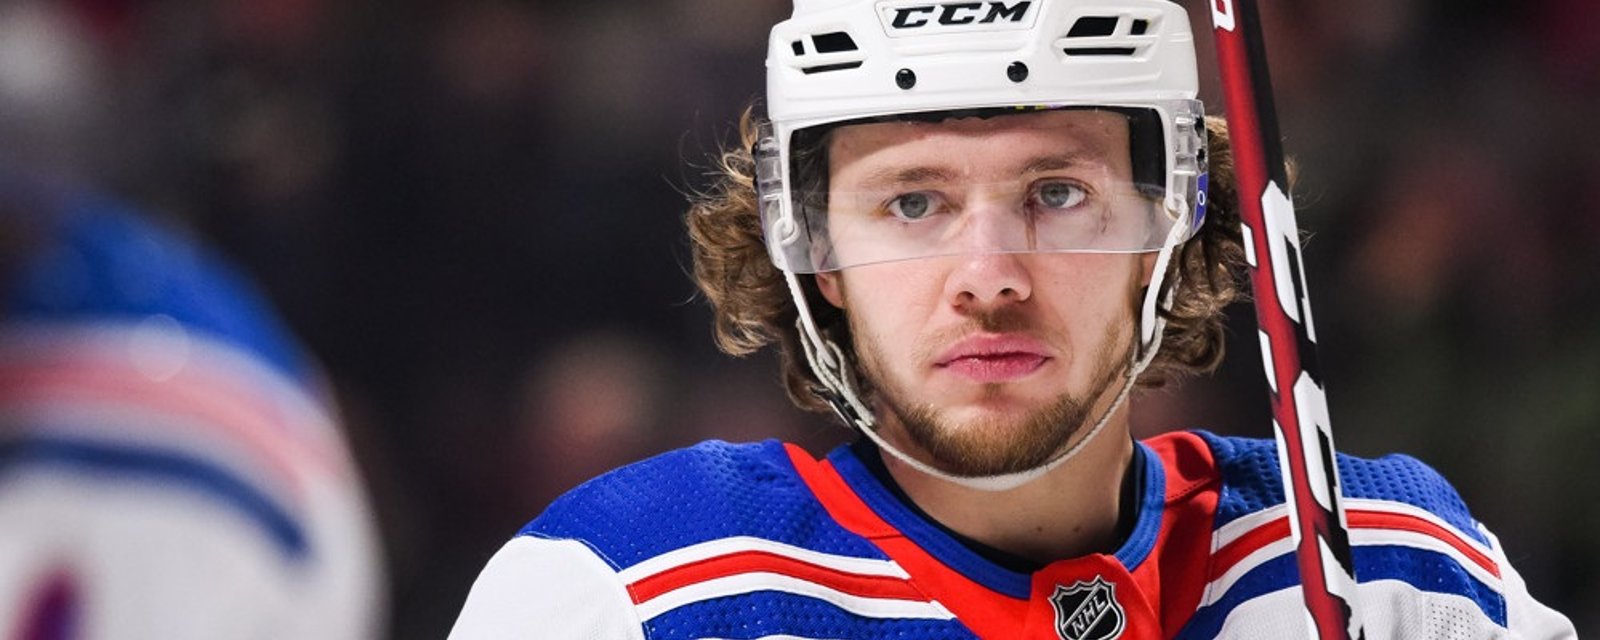 Panarin's former coach shares details of the alleged incident. 